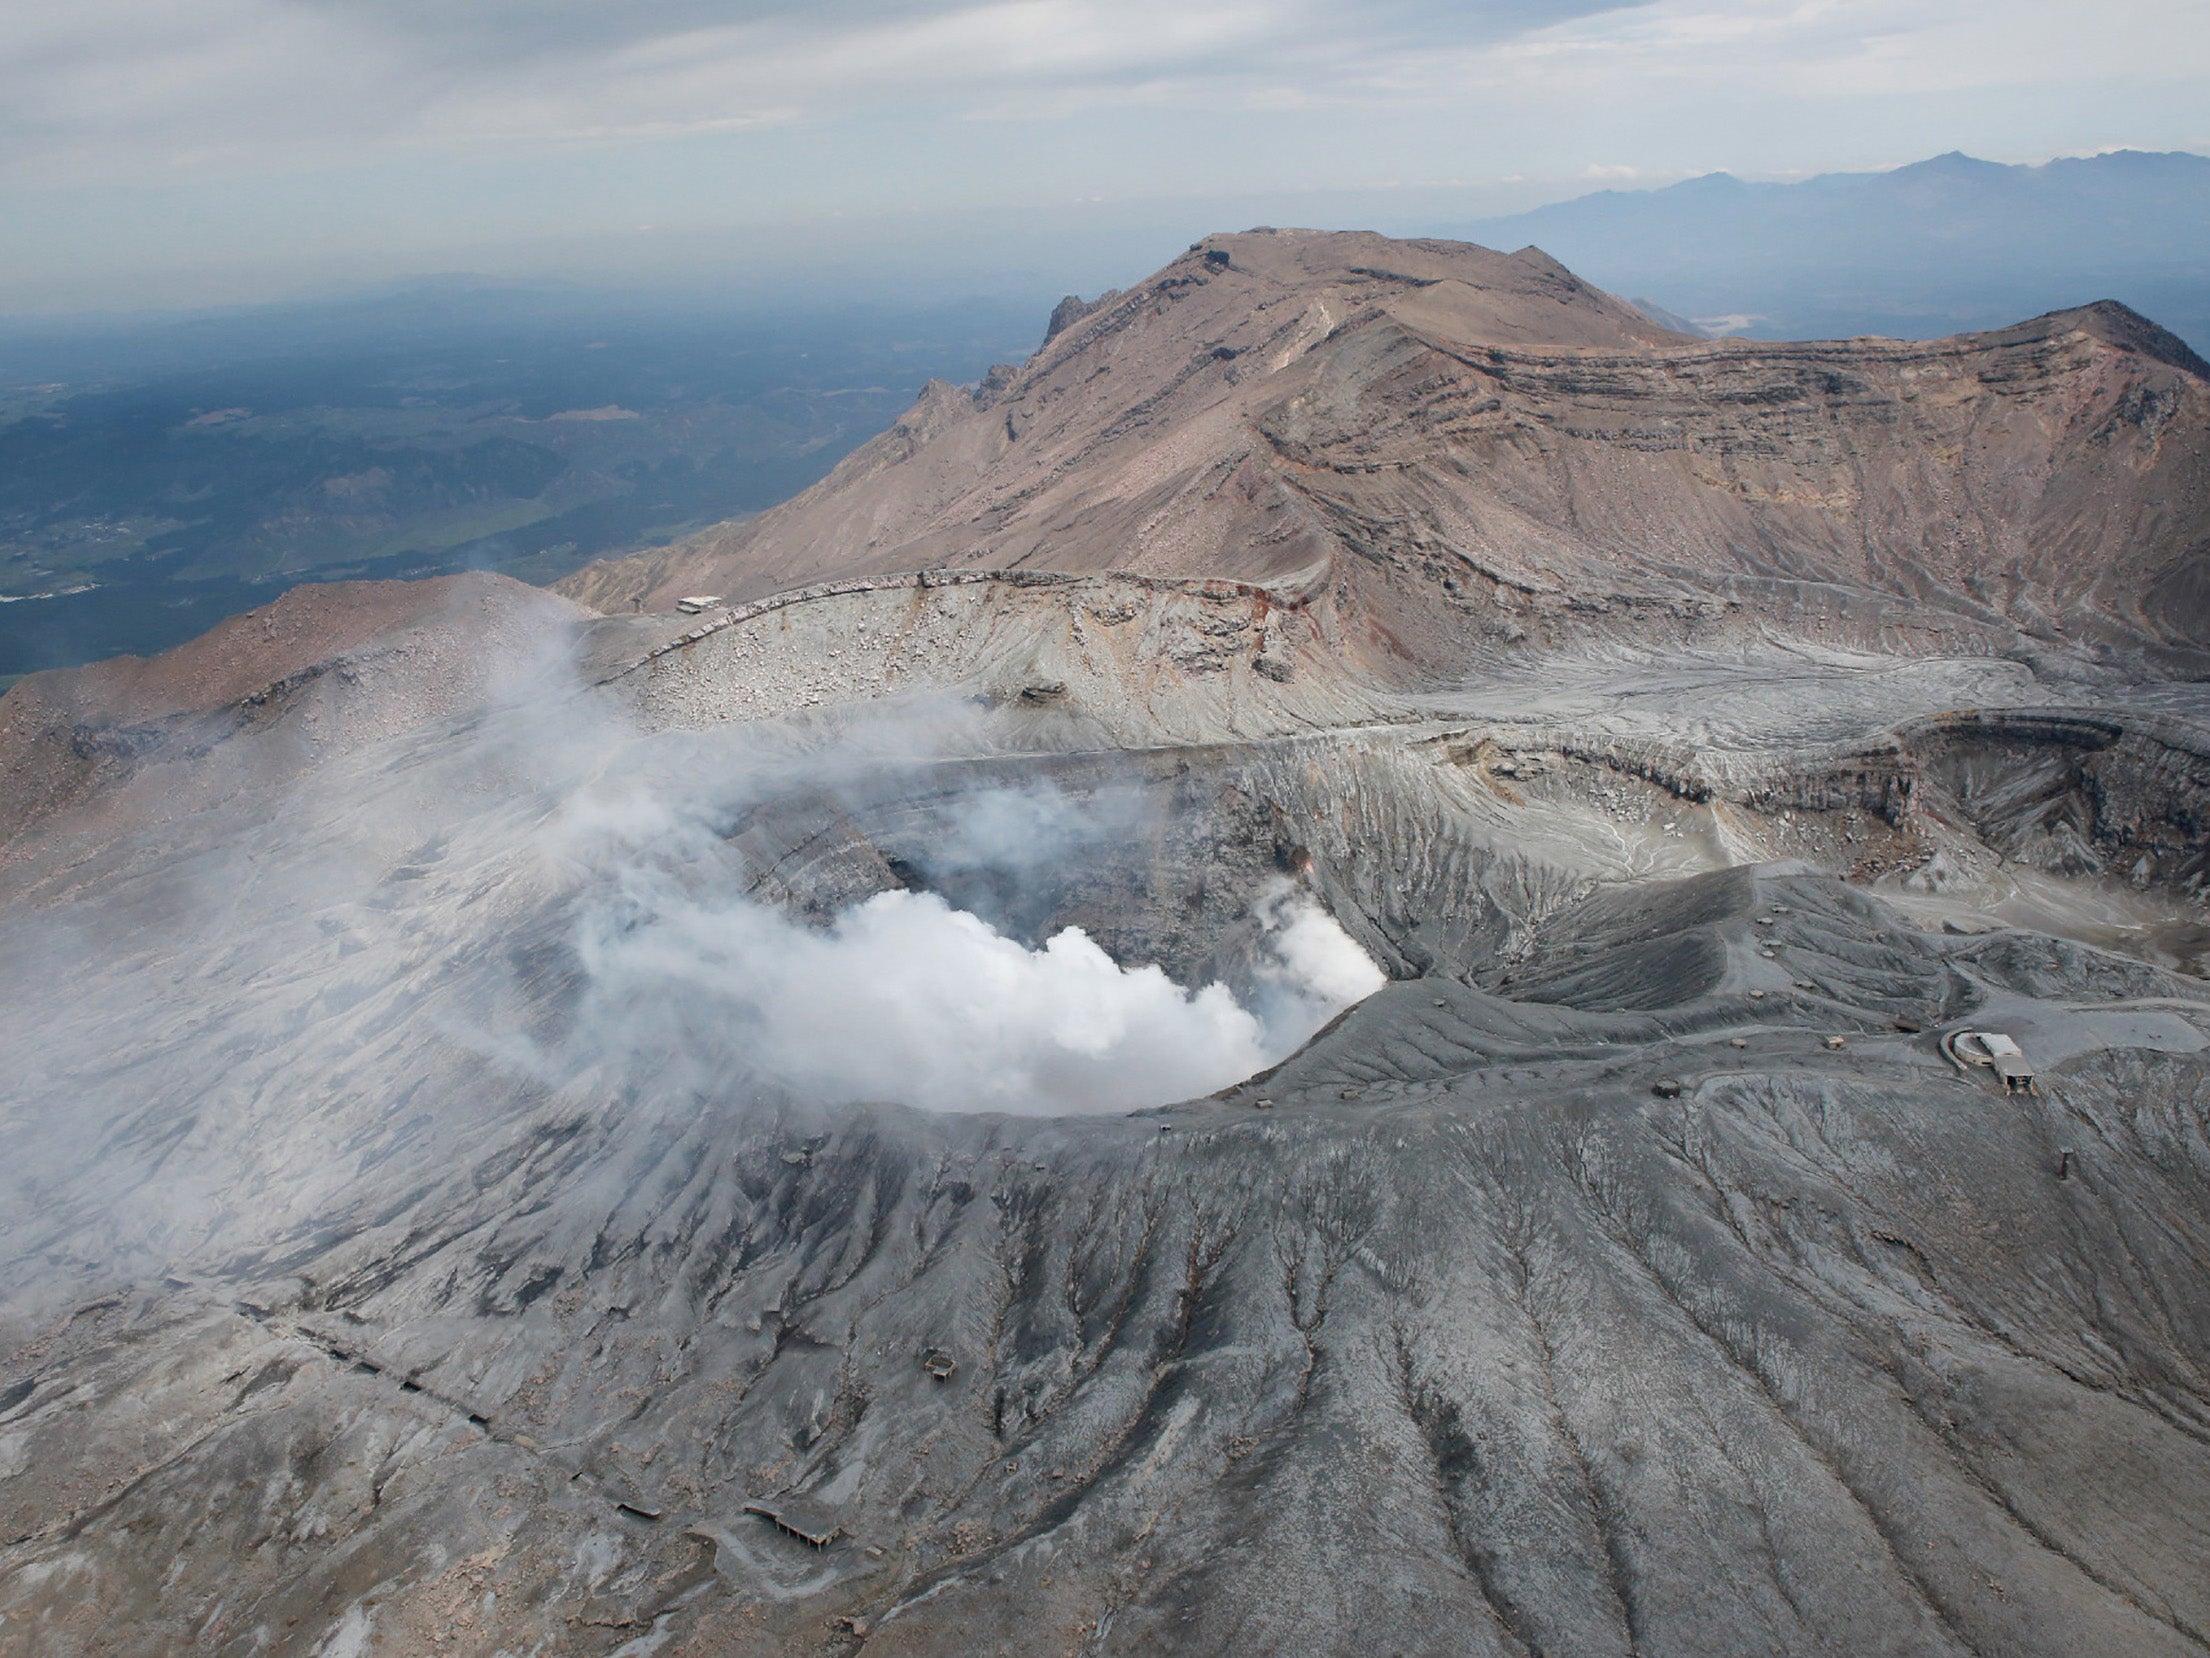 Mount Aso is one of the largest active volcanoes in the world, but for almost four decades it did not pose a threat to communities living nearby